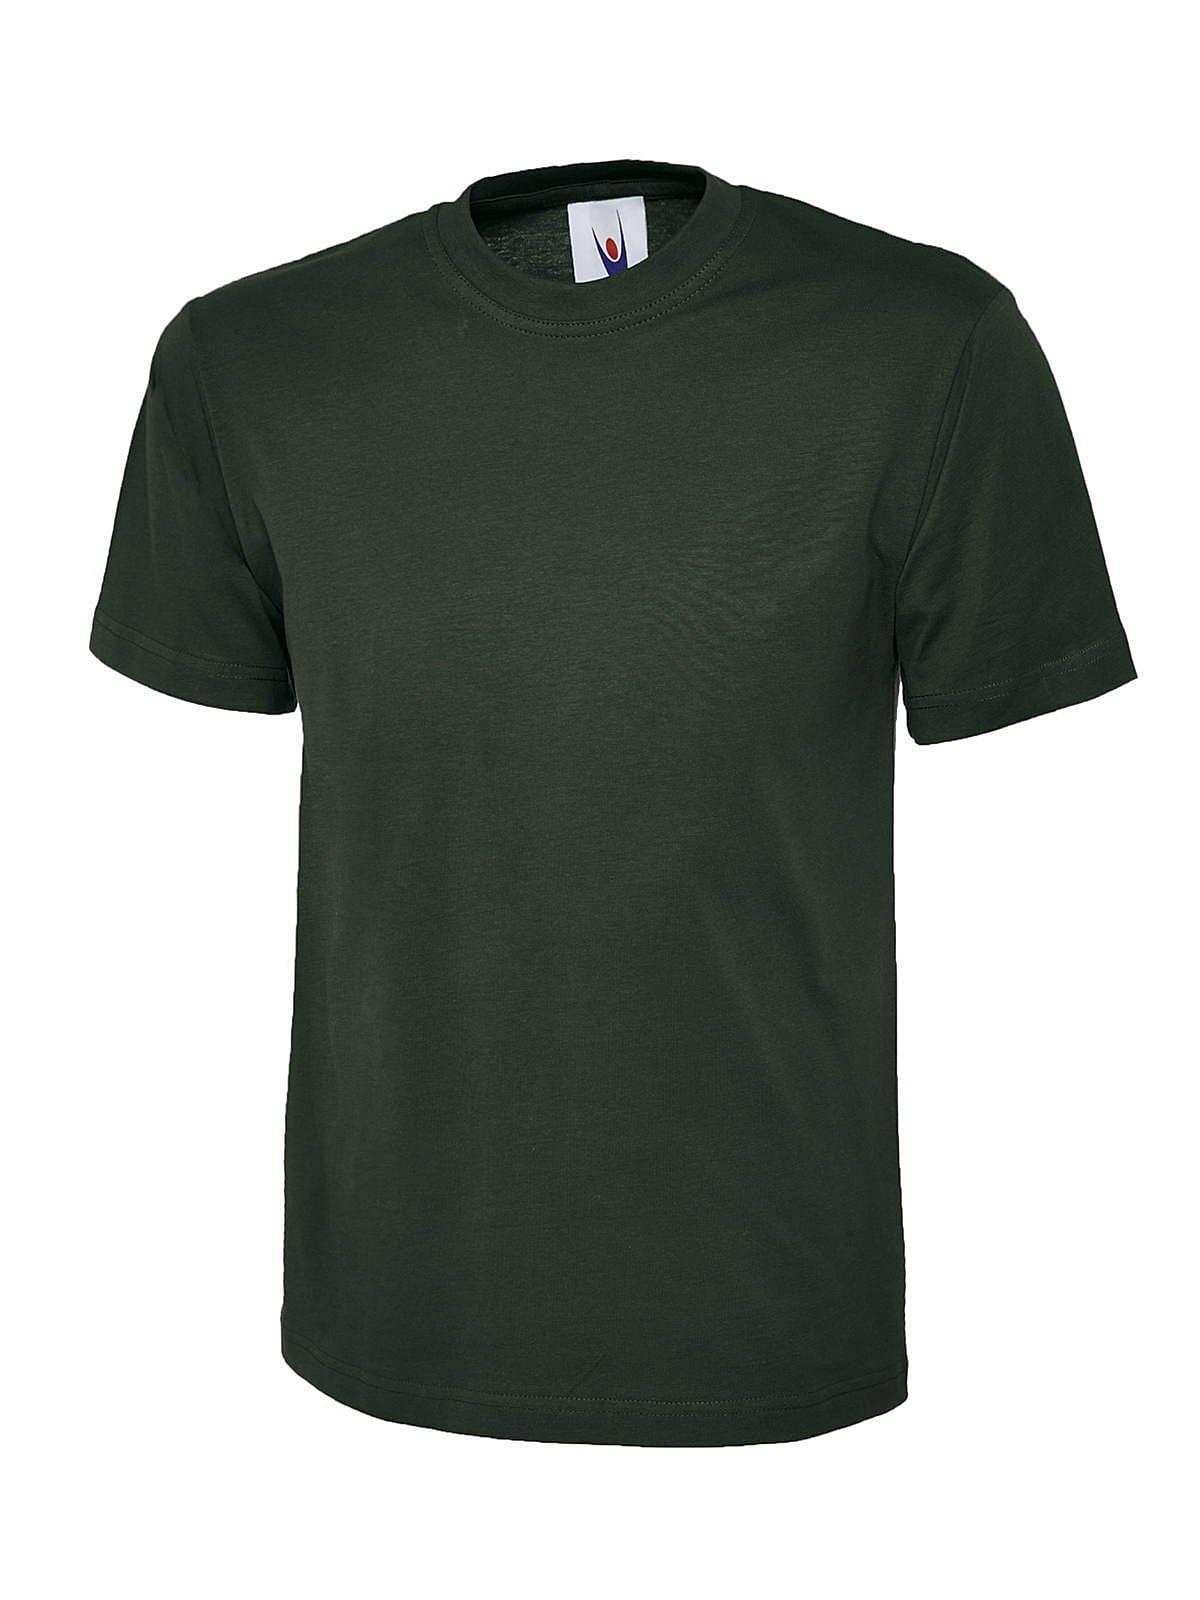 Uneek Childrens 180GSM T-Shirt in Bottle Green (Product Code: UC306)